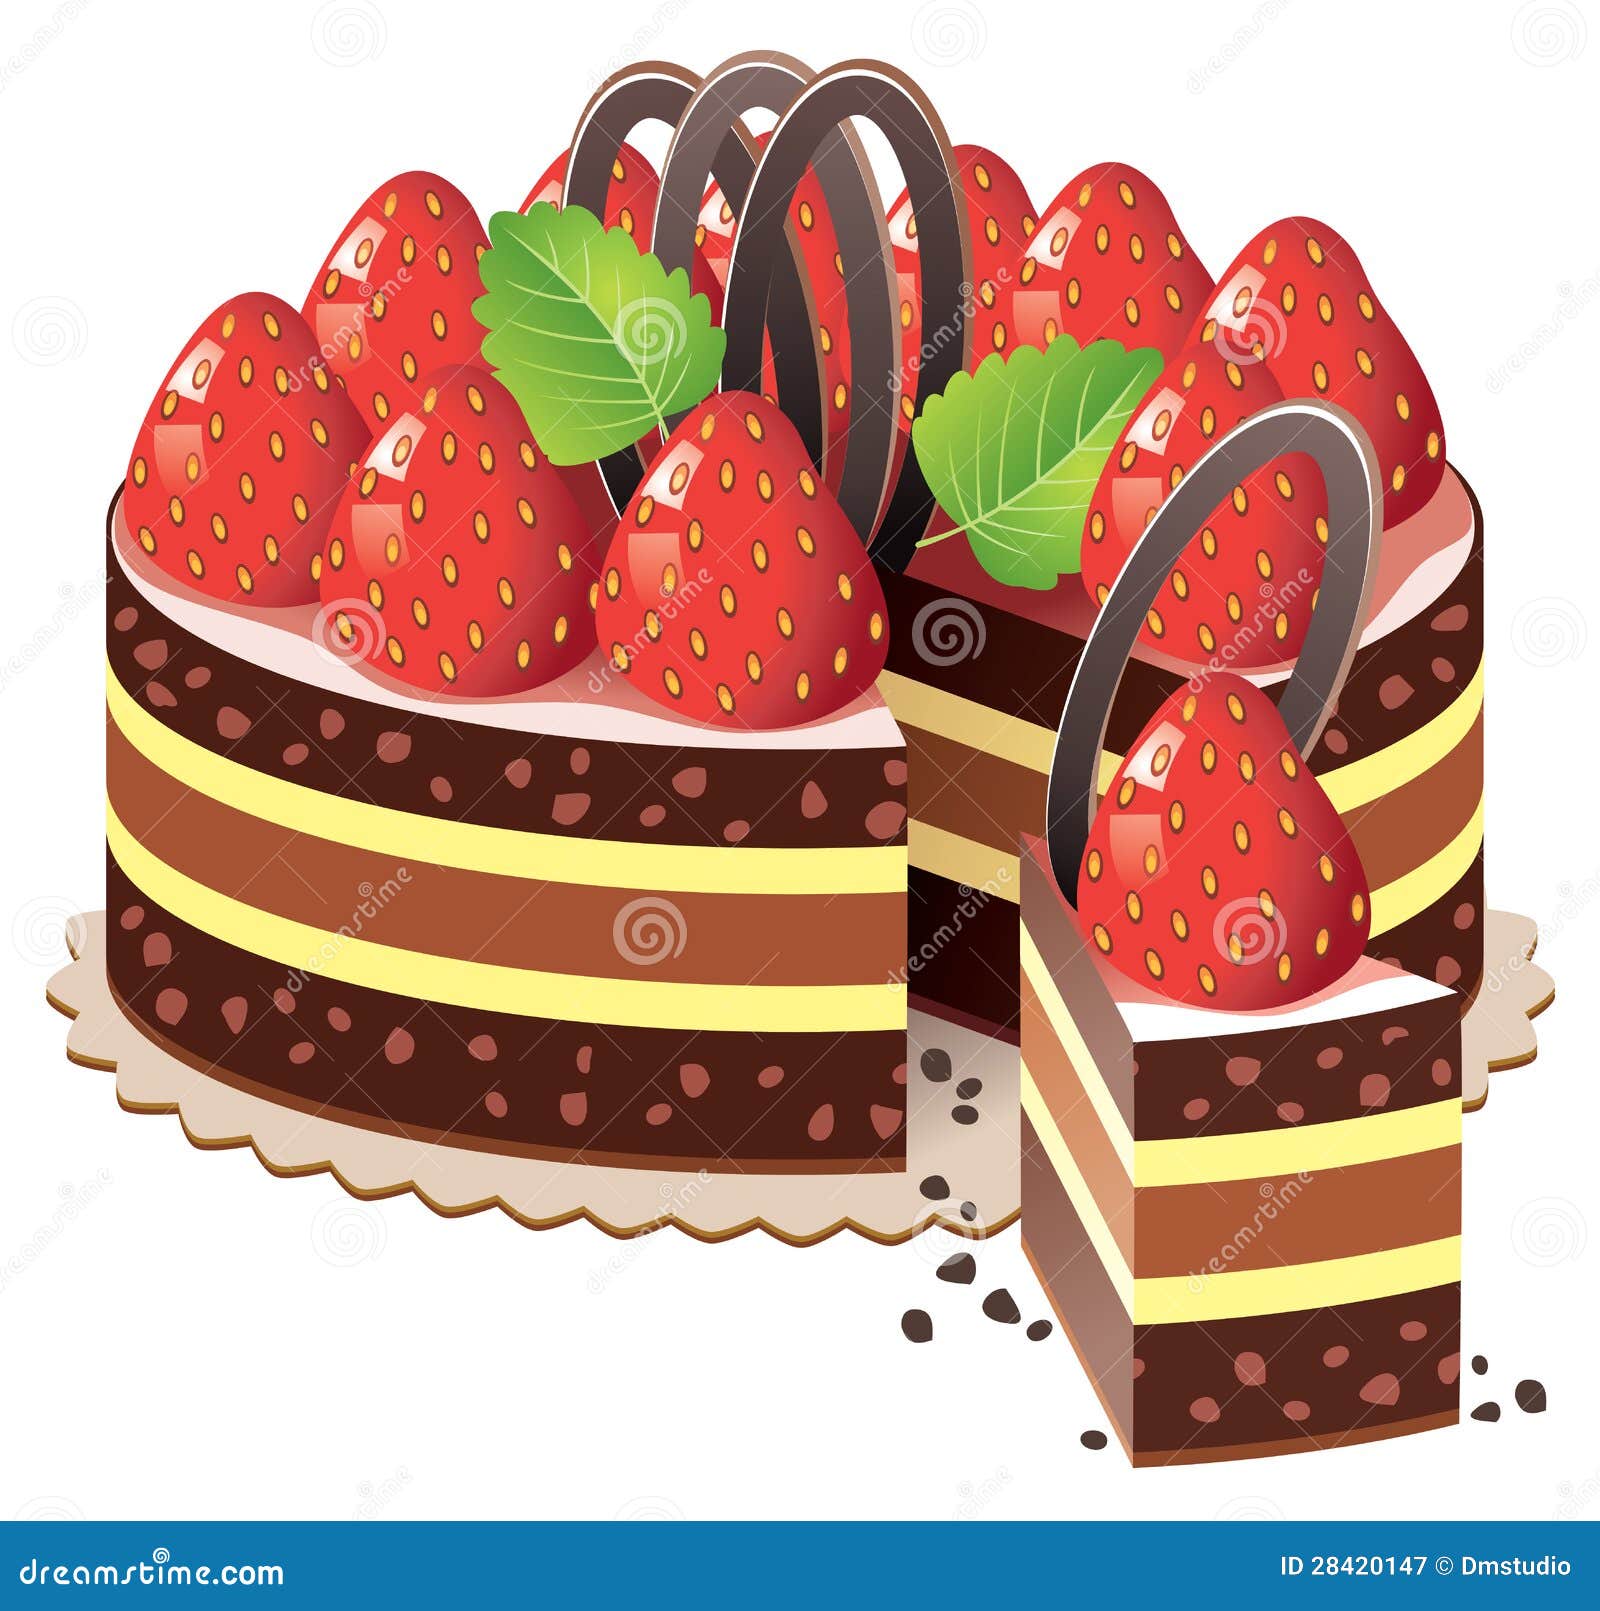 vector 2d pink cake images